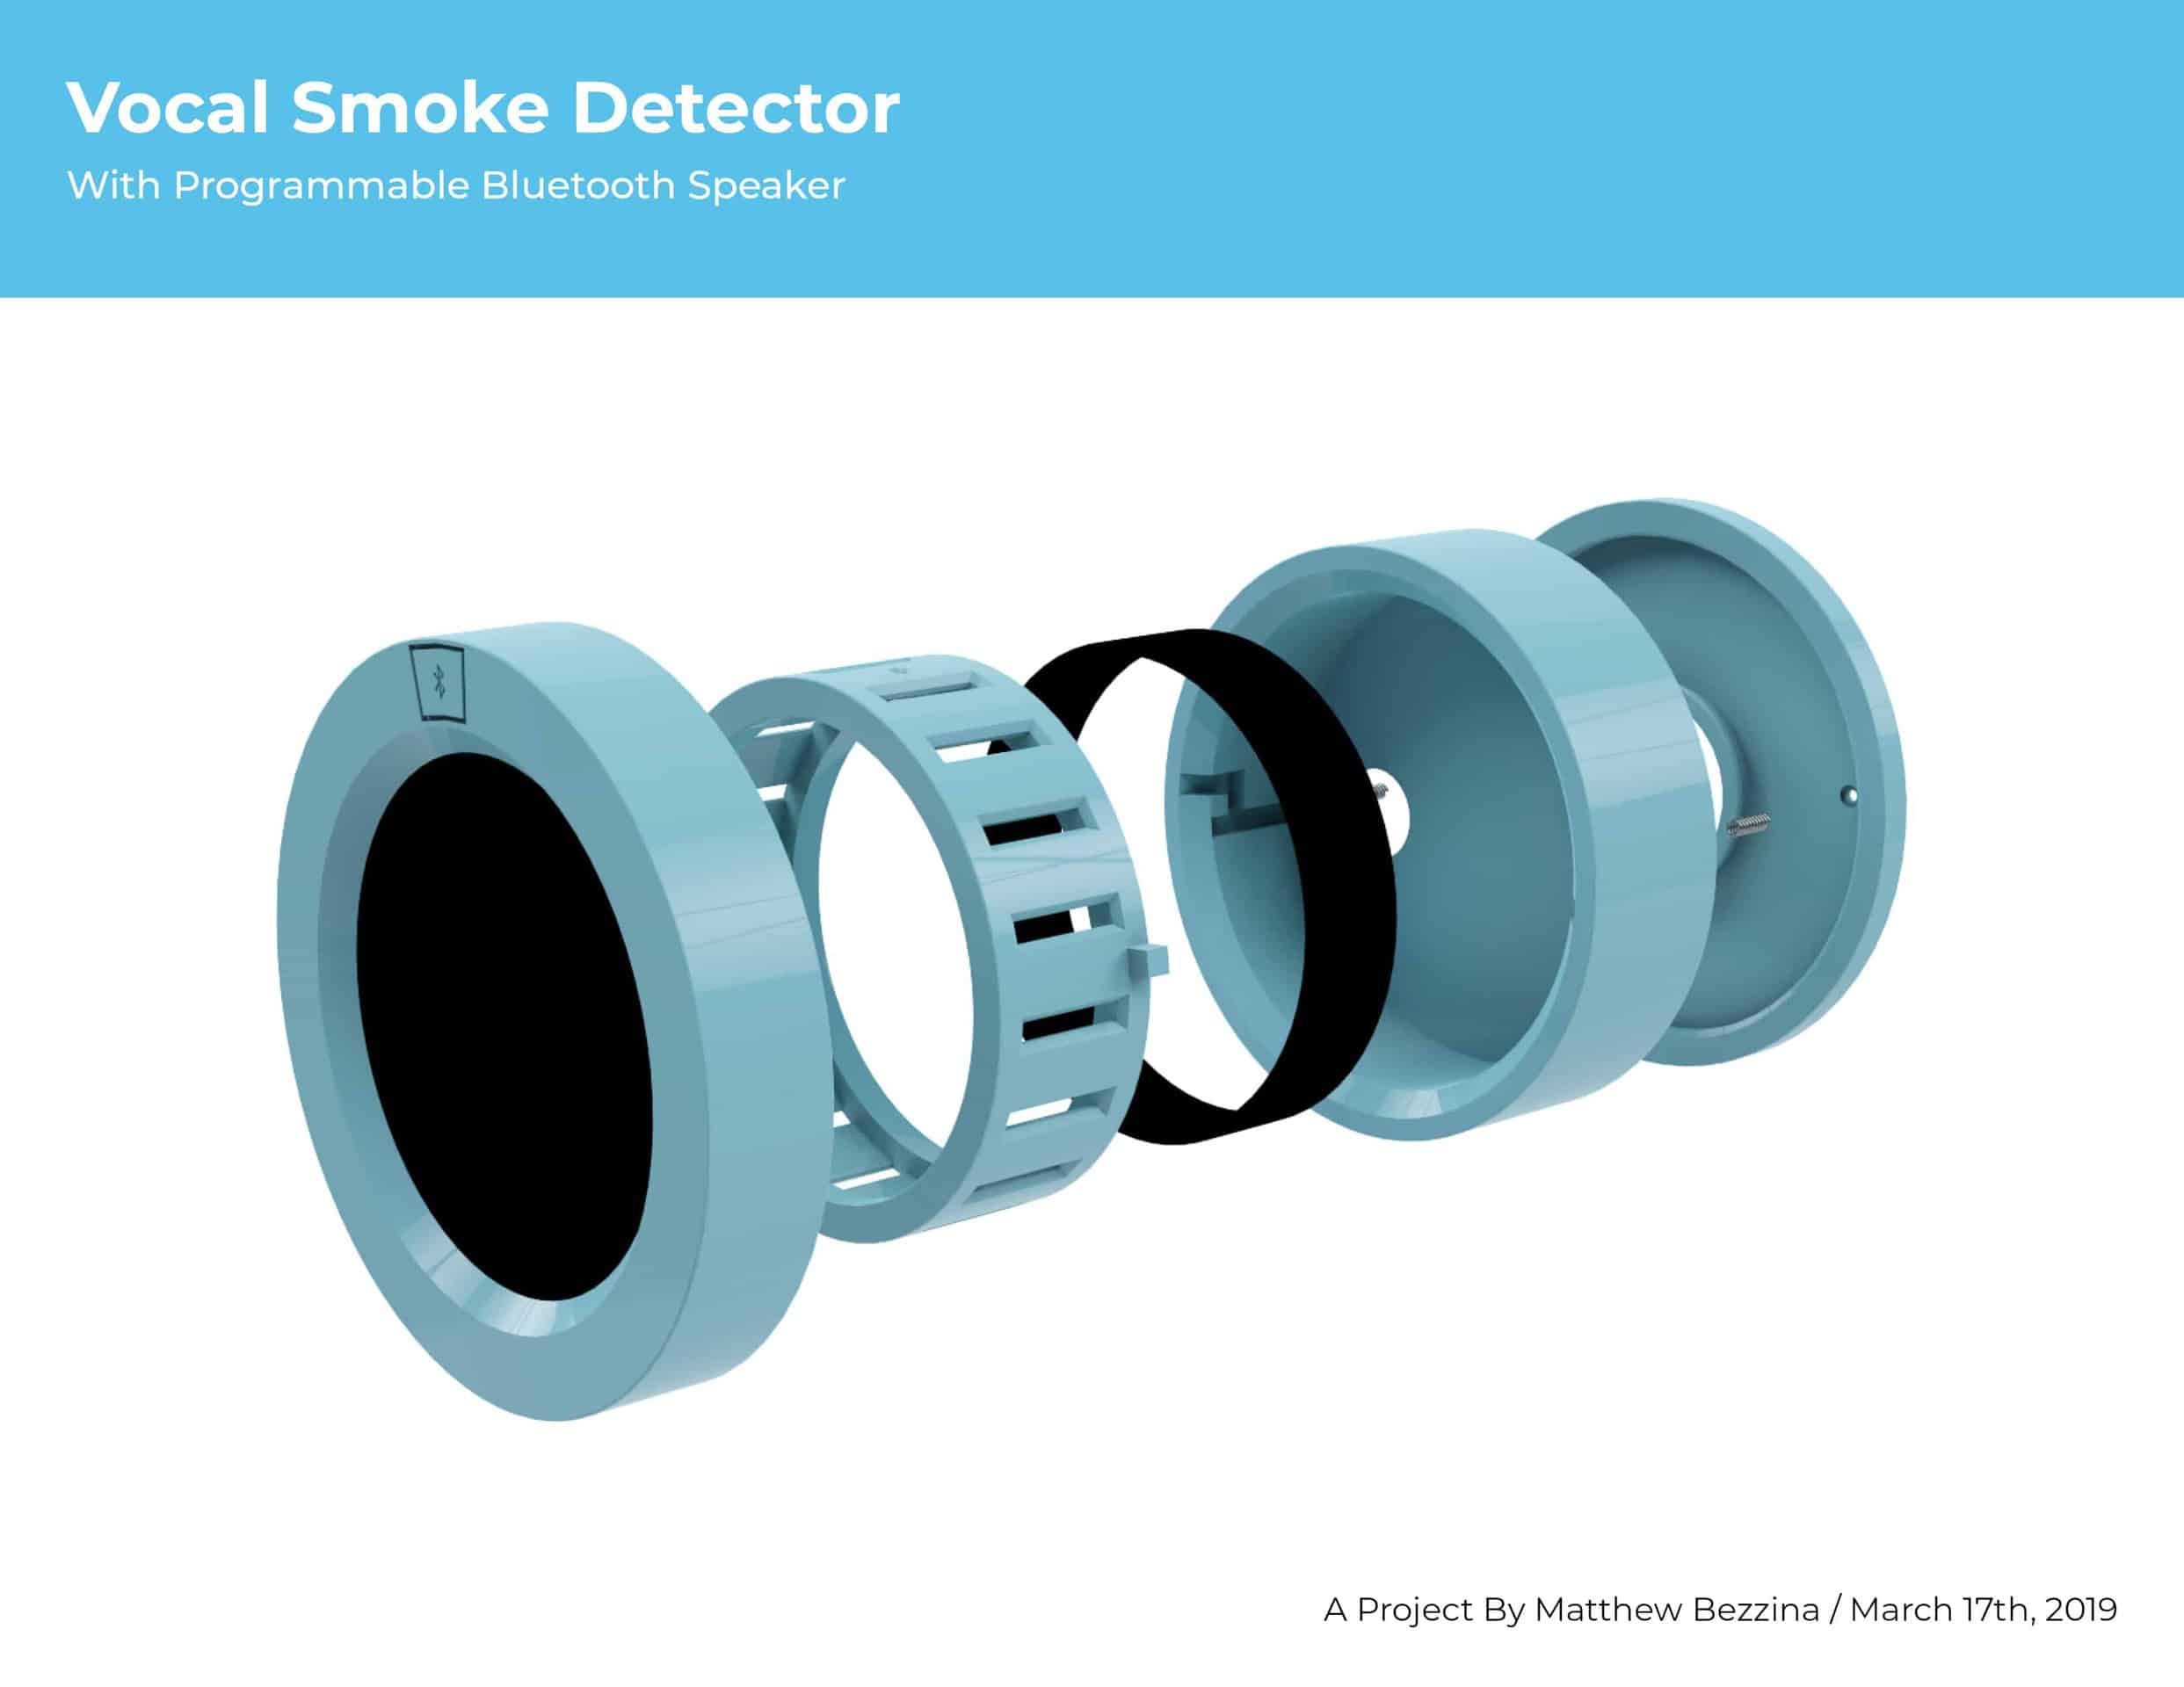 Vocal Smoke Detector Product Concept